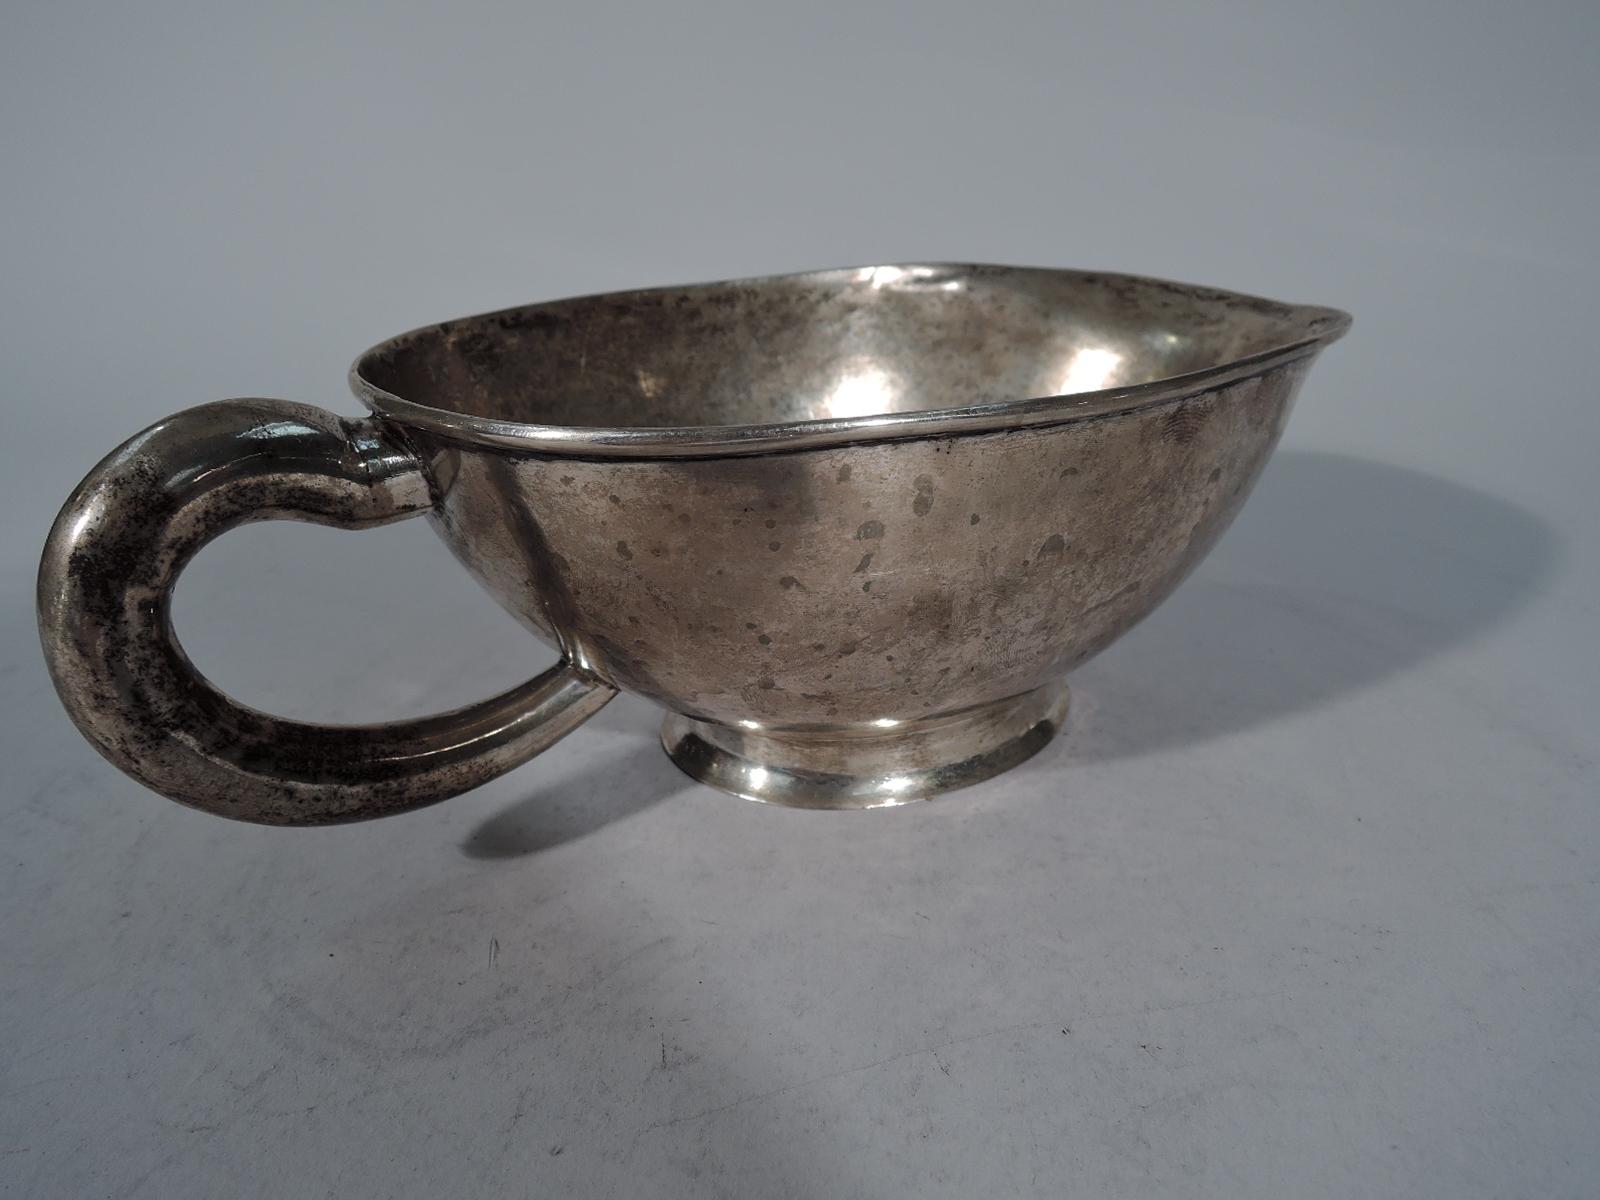 Large South American silver gravy boat, early 20th century. Ovoid with curved sides and wide lip spout. Elongated C-scroll handle and spread and raised oval foot. Visible handwork. Weight: 8 troy ounces.